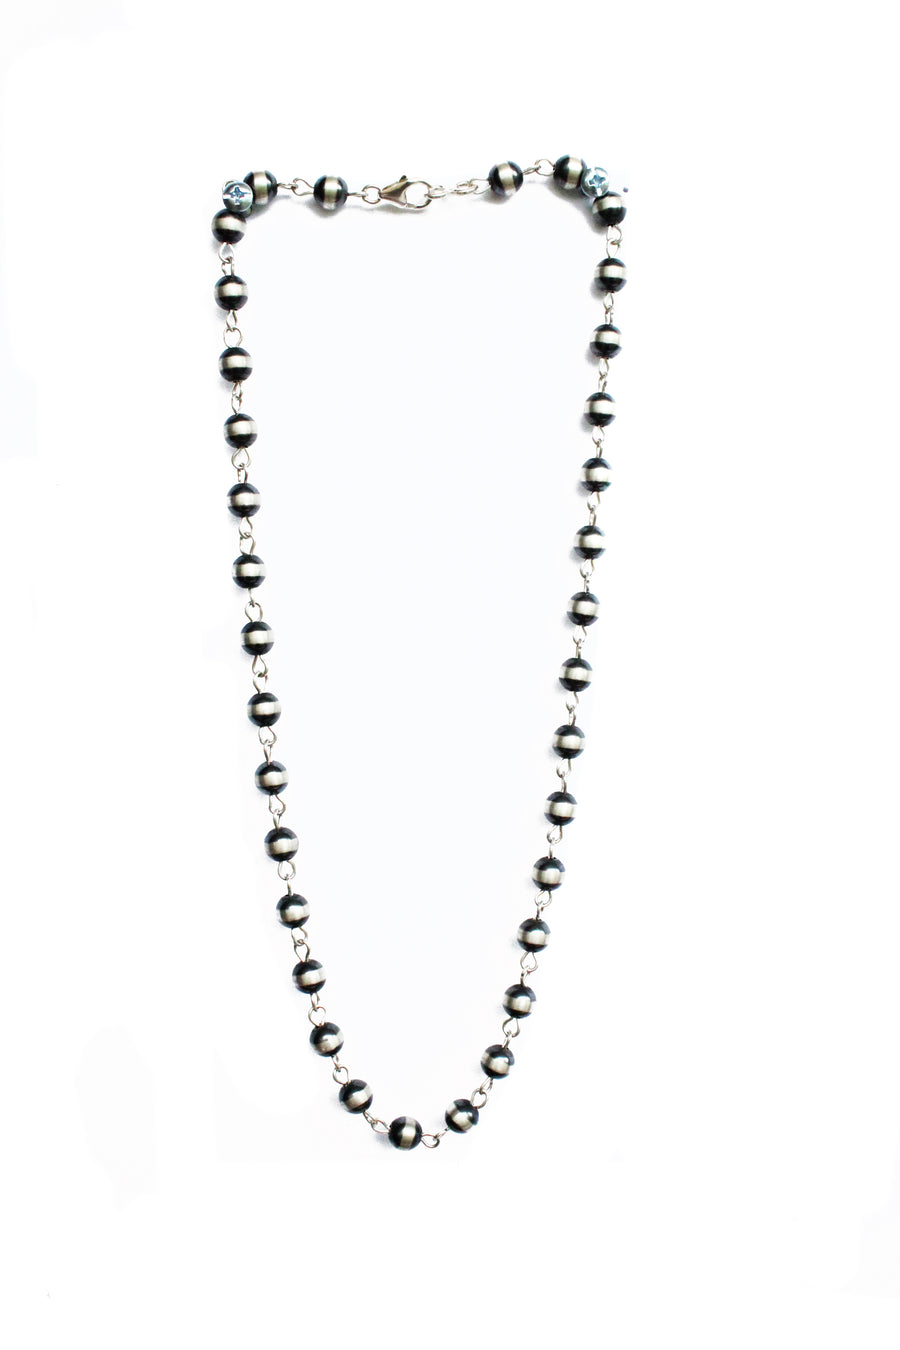 {Rosary Style} 8mm Beads